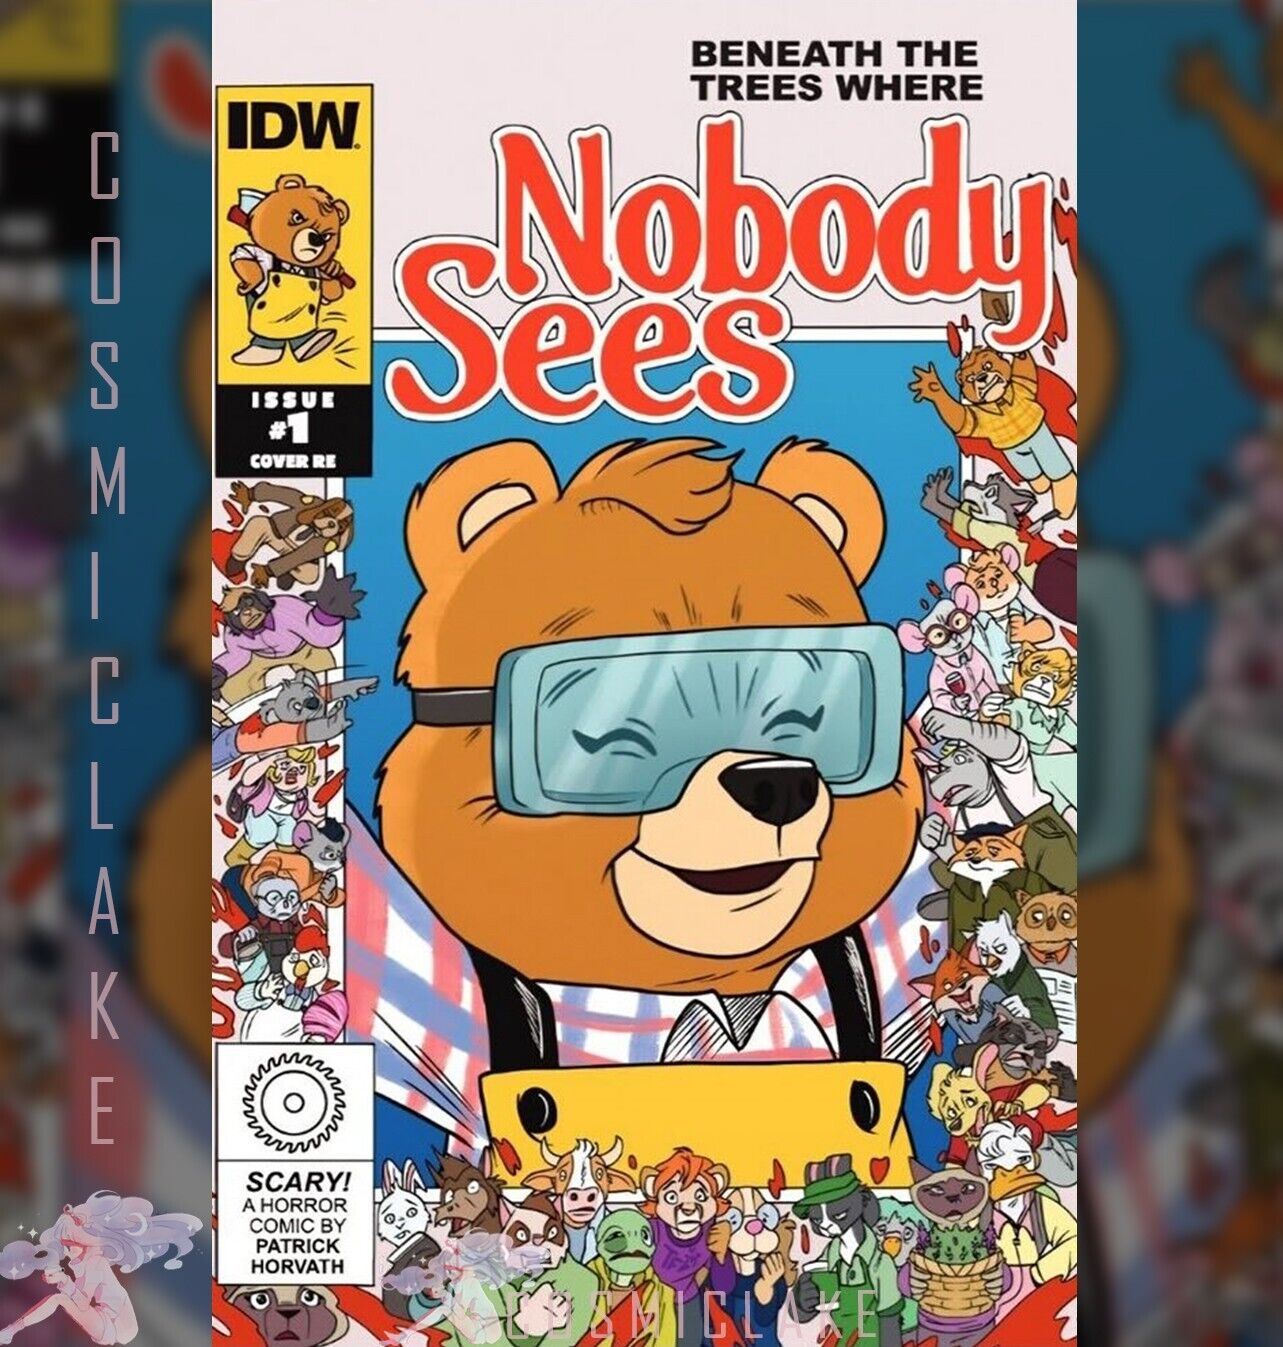 BENEATH THE TREES WHERE NOBODY SEES #1 CARE BEARS VARIANT LE 350 PRESALE 7/12☪